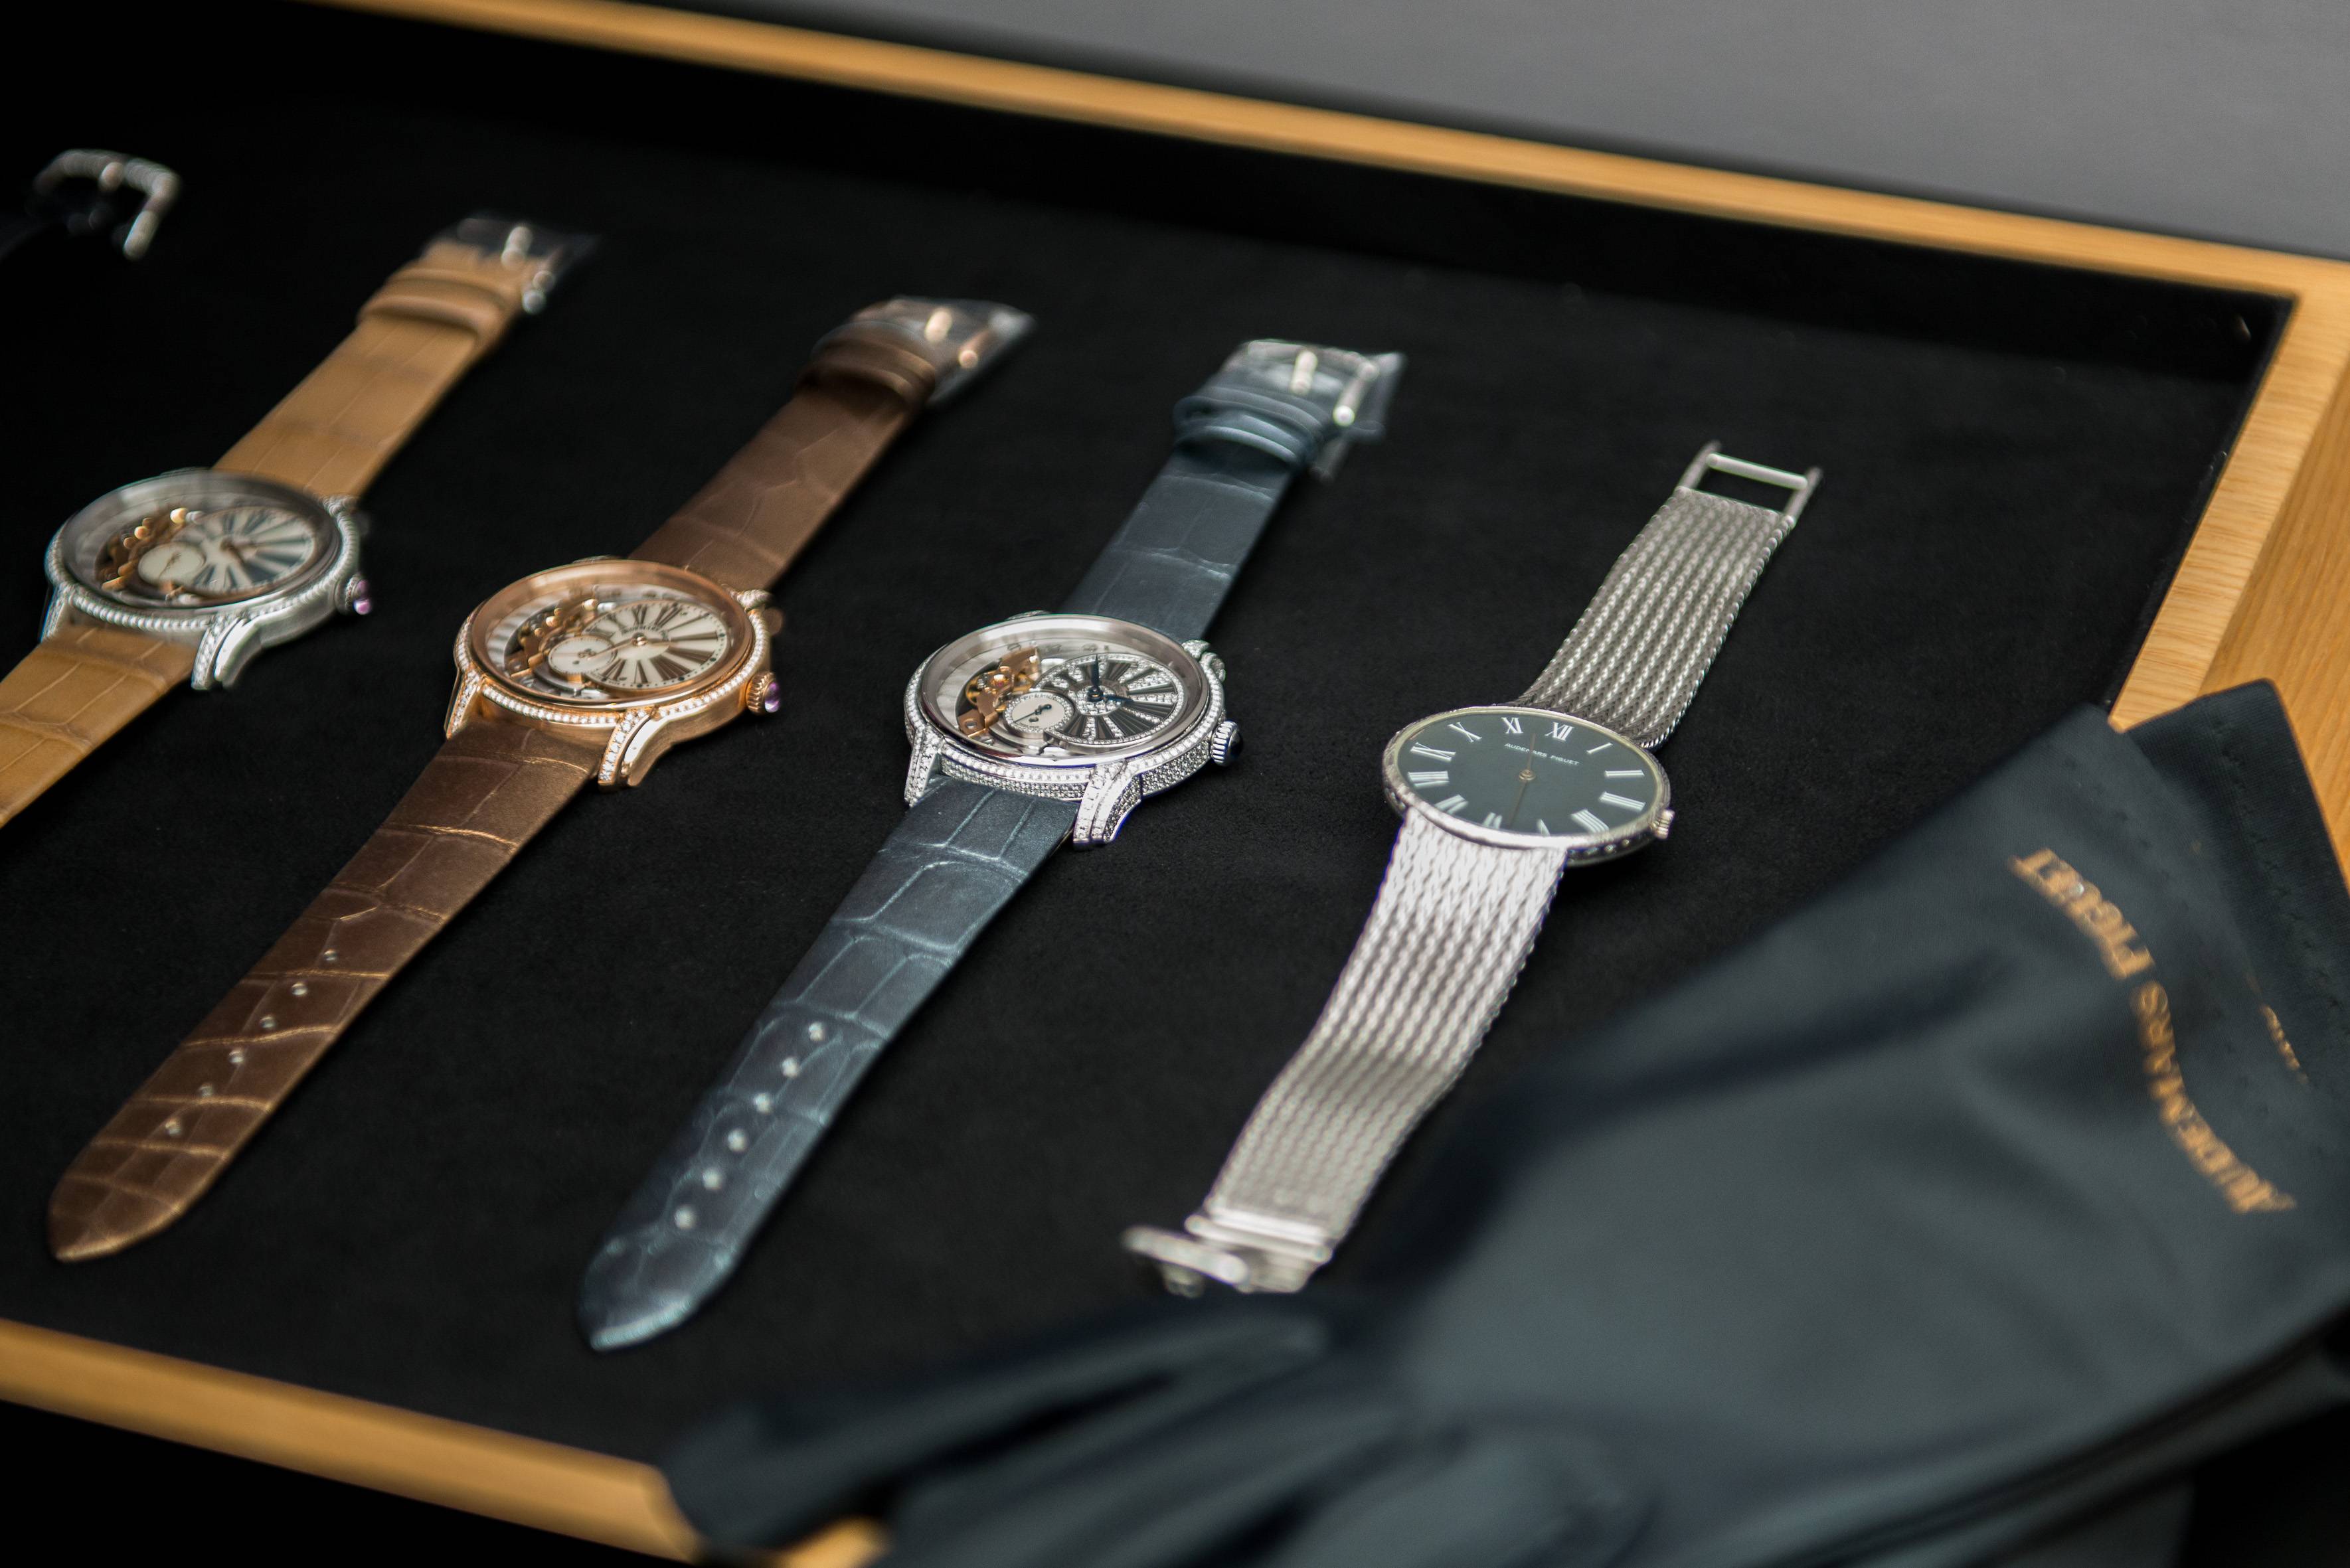 Audemars Piguet and Ahmed Seddiqi & Sons Launch the Millenary collection